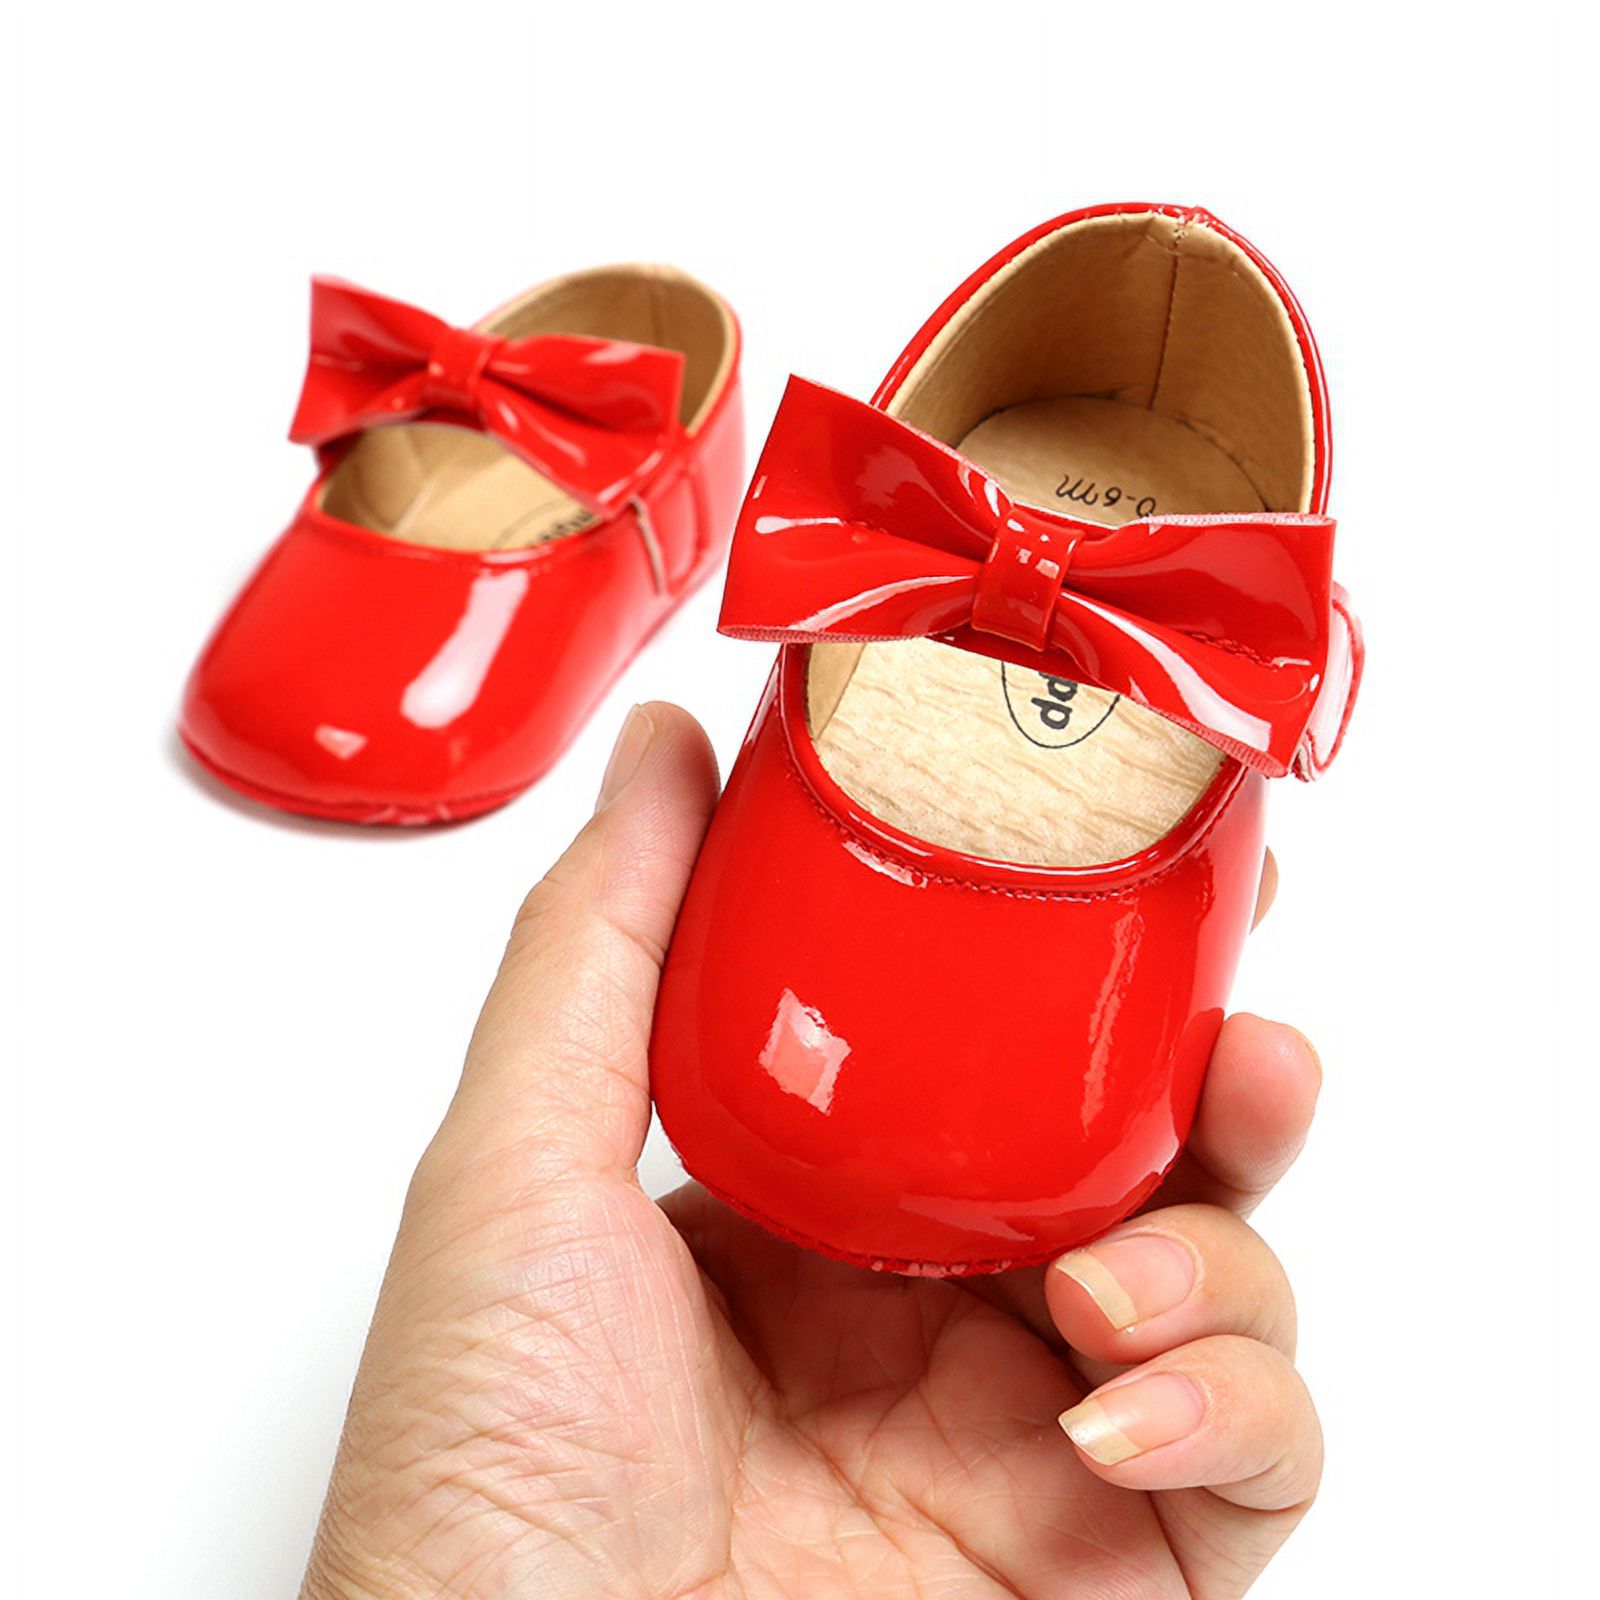 Maxcozy Infant Toddler Baby Girl's Soft Sole Anti-Slip Casual Shoes PU Leather Bowknot Princess Shoes - image 5 of 8